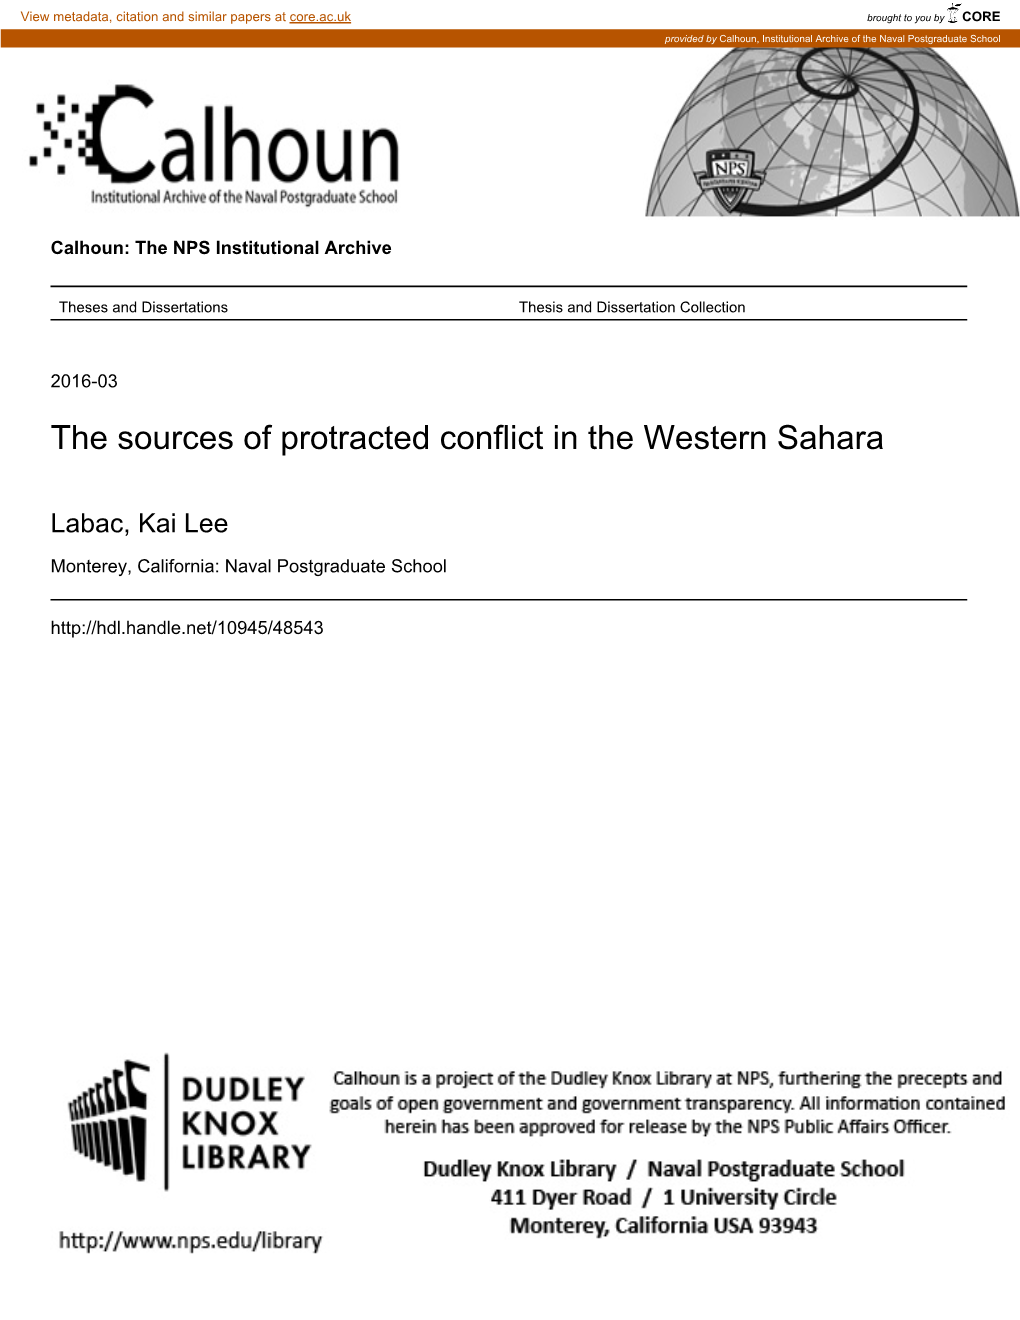 The Sources of Protracted Conflict in the Western Sahara